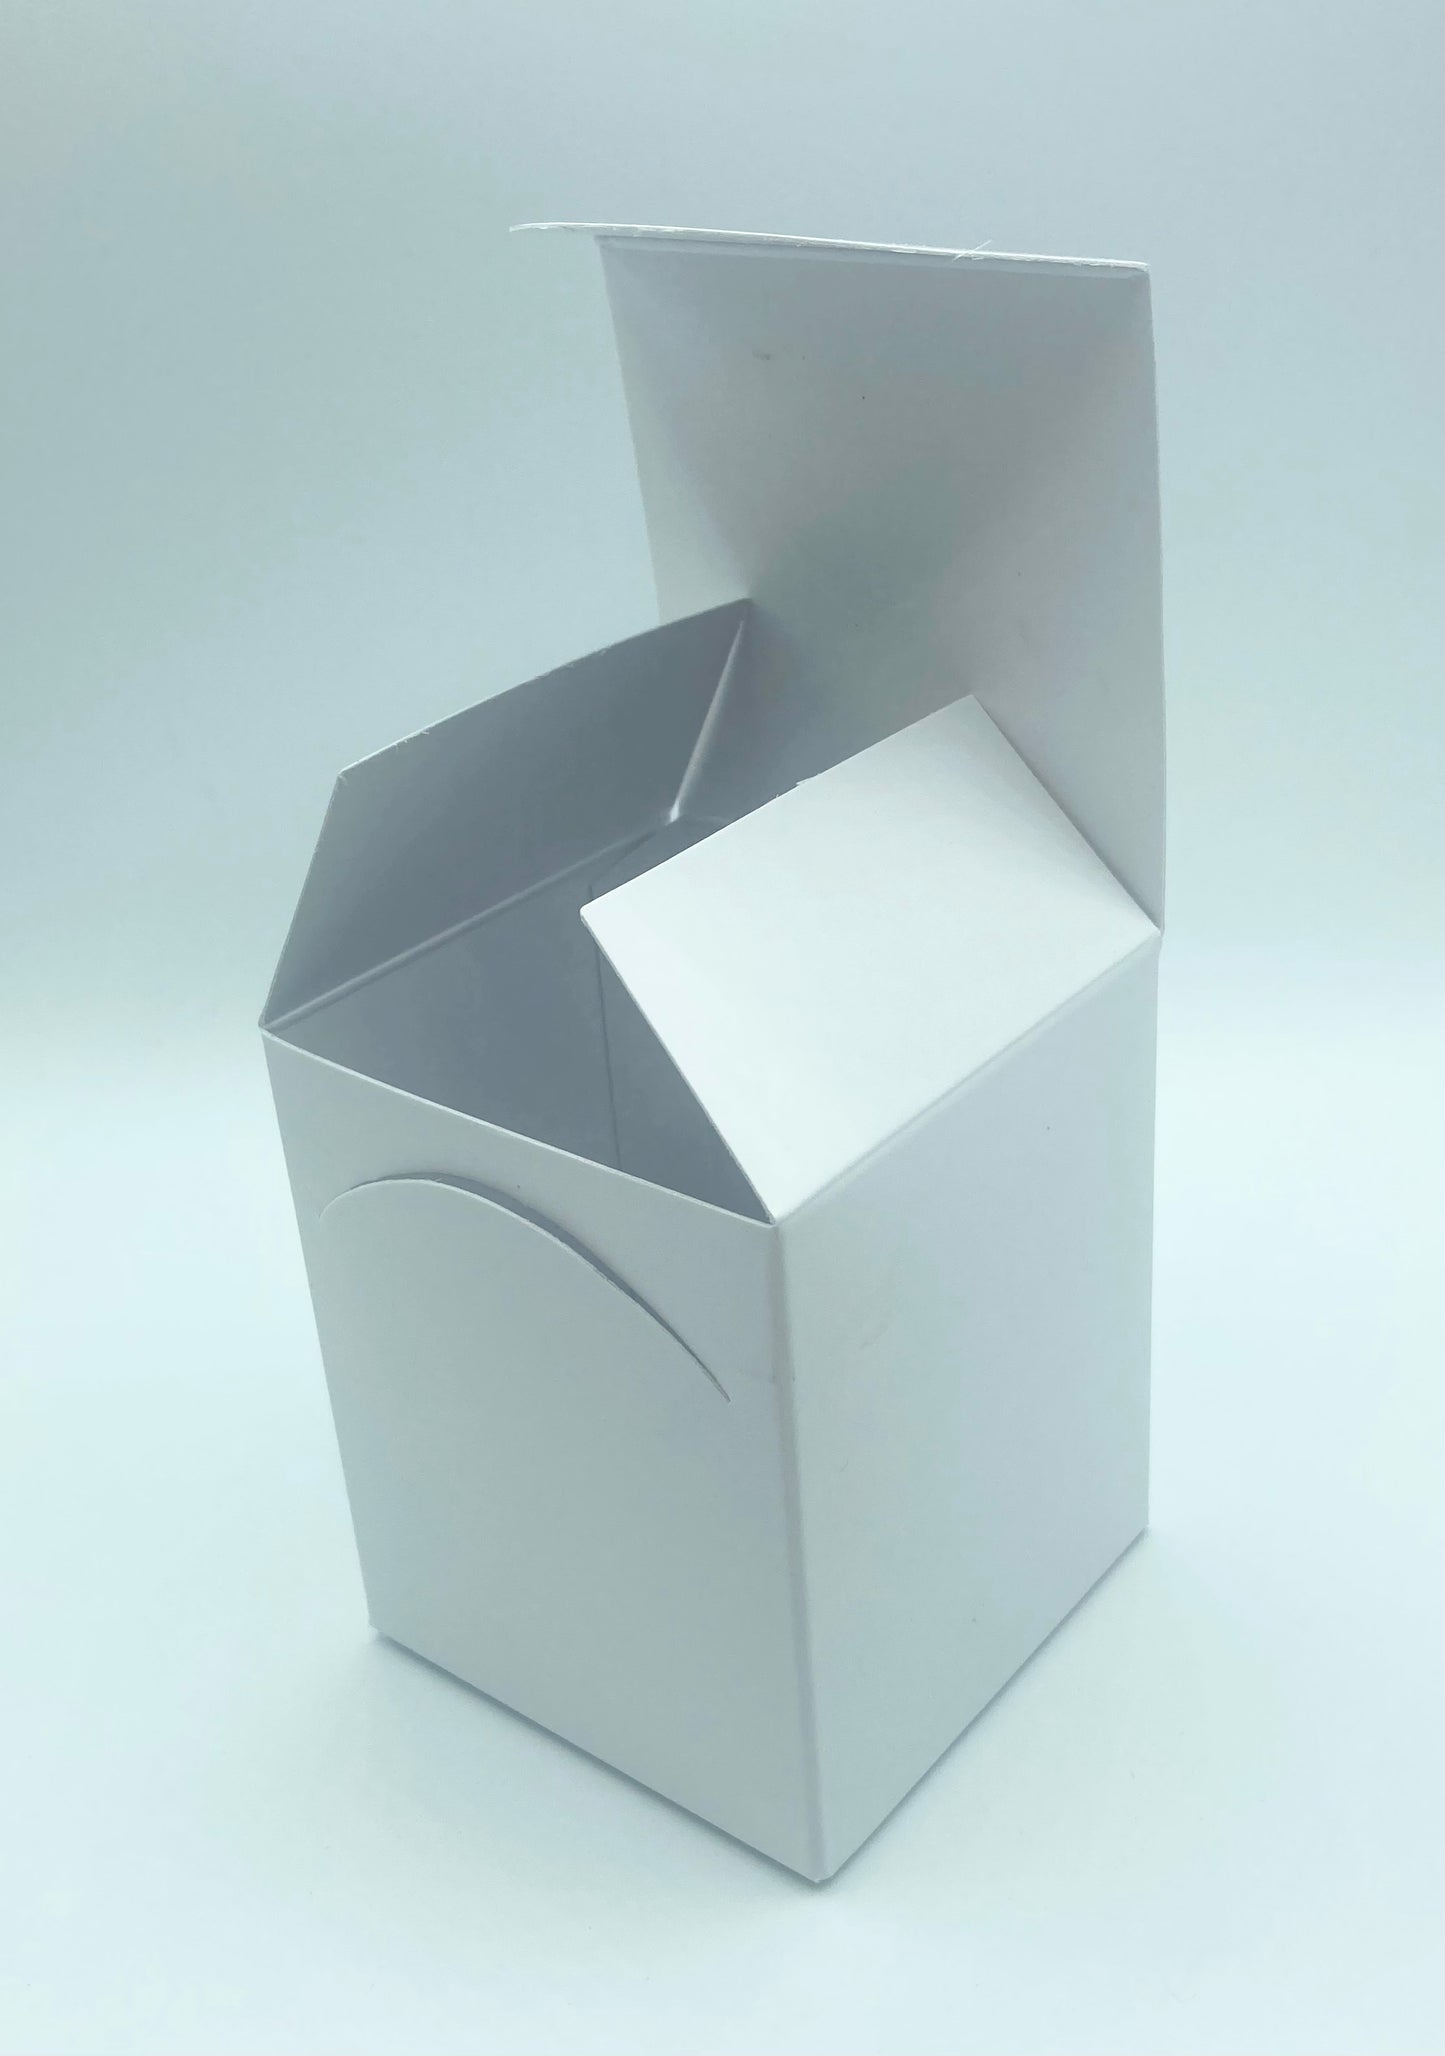 20CL CANDLE BOX - Front opening - WHITE ENVELOPE BASE (Pack of 10)